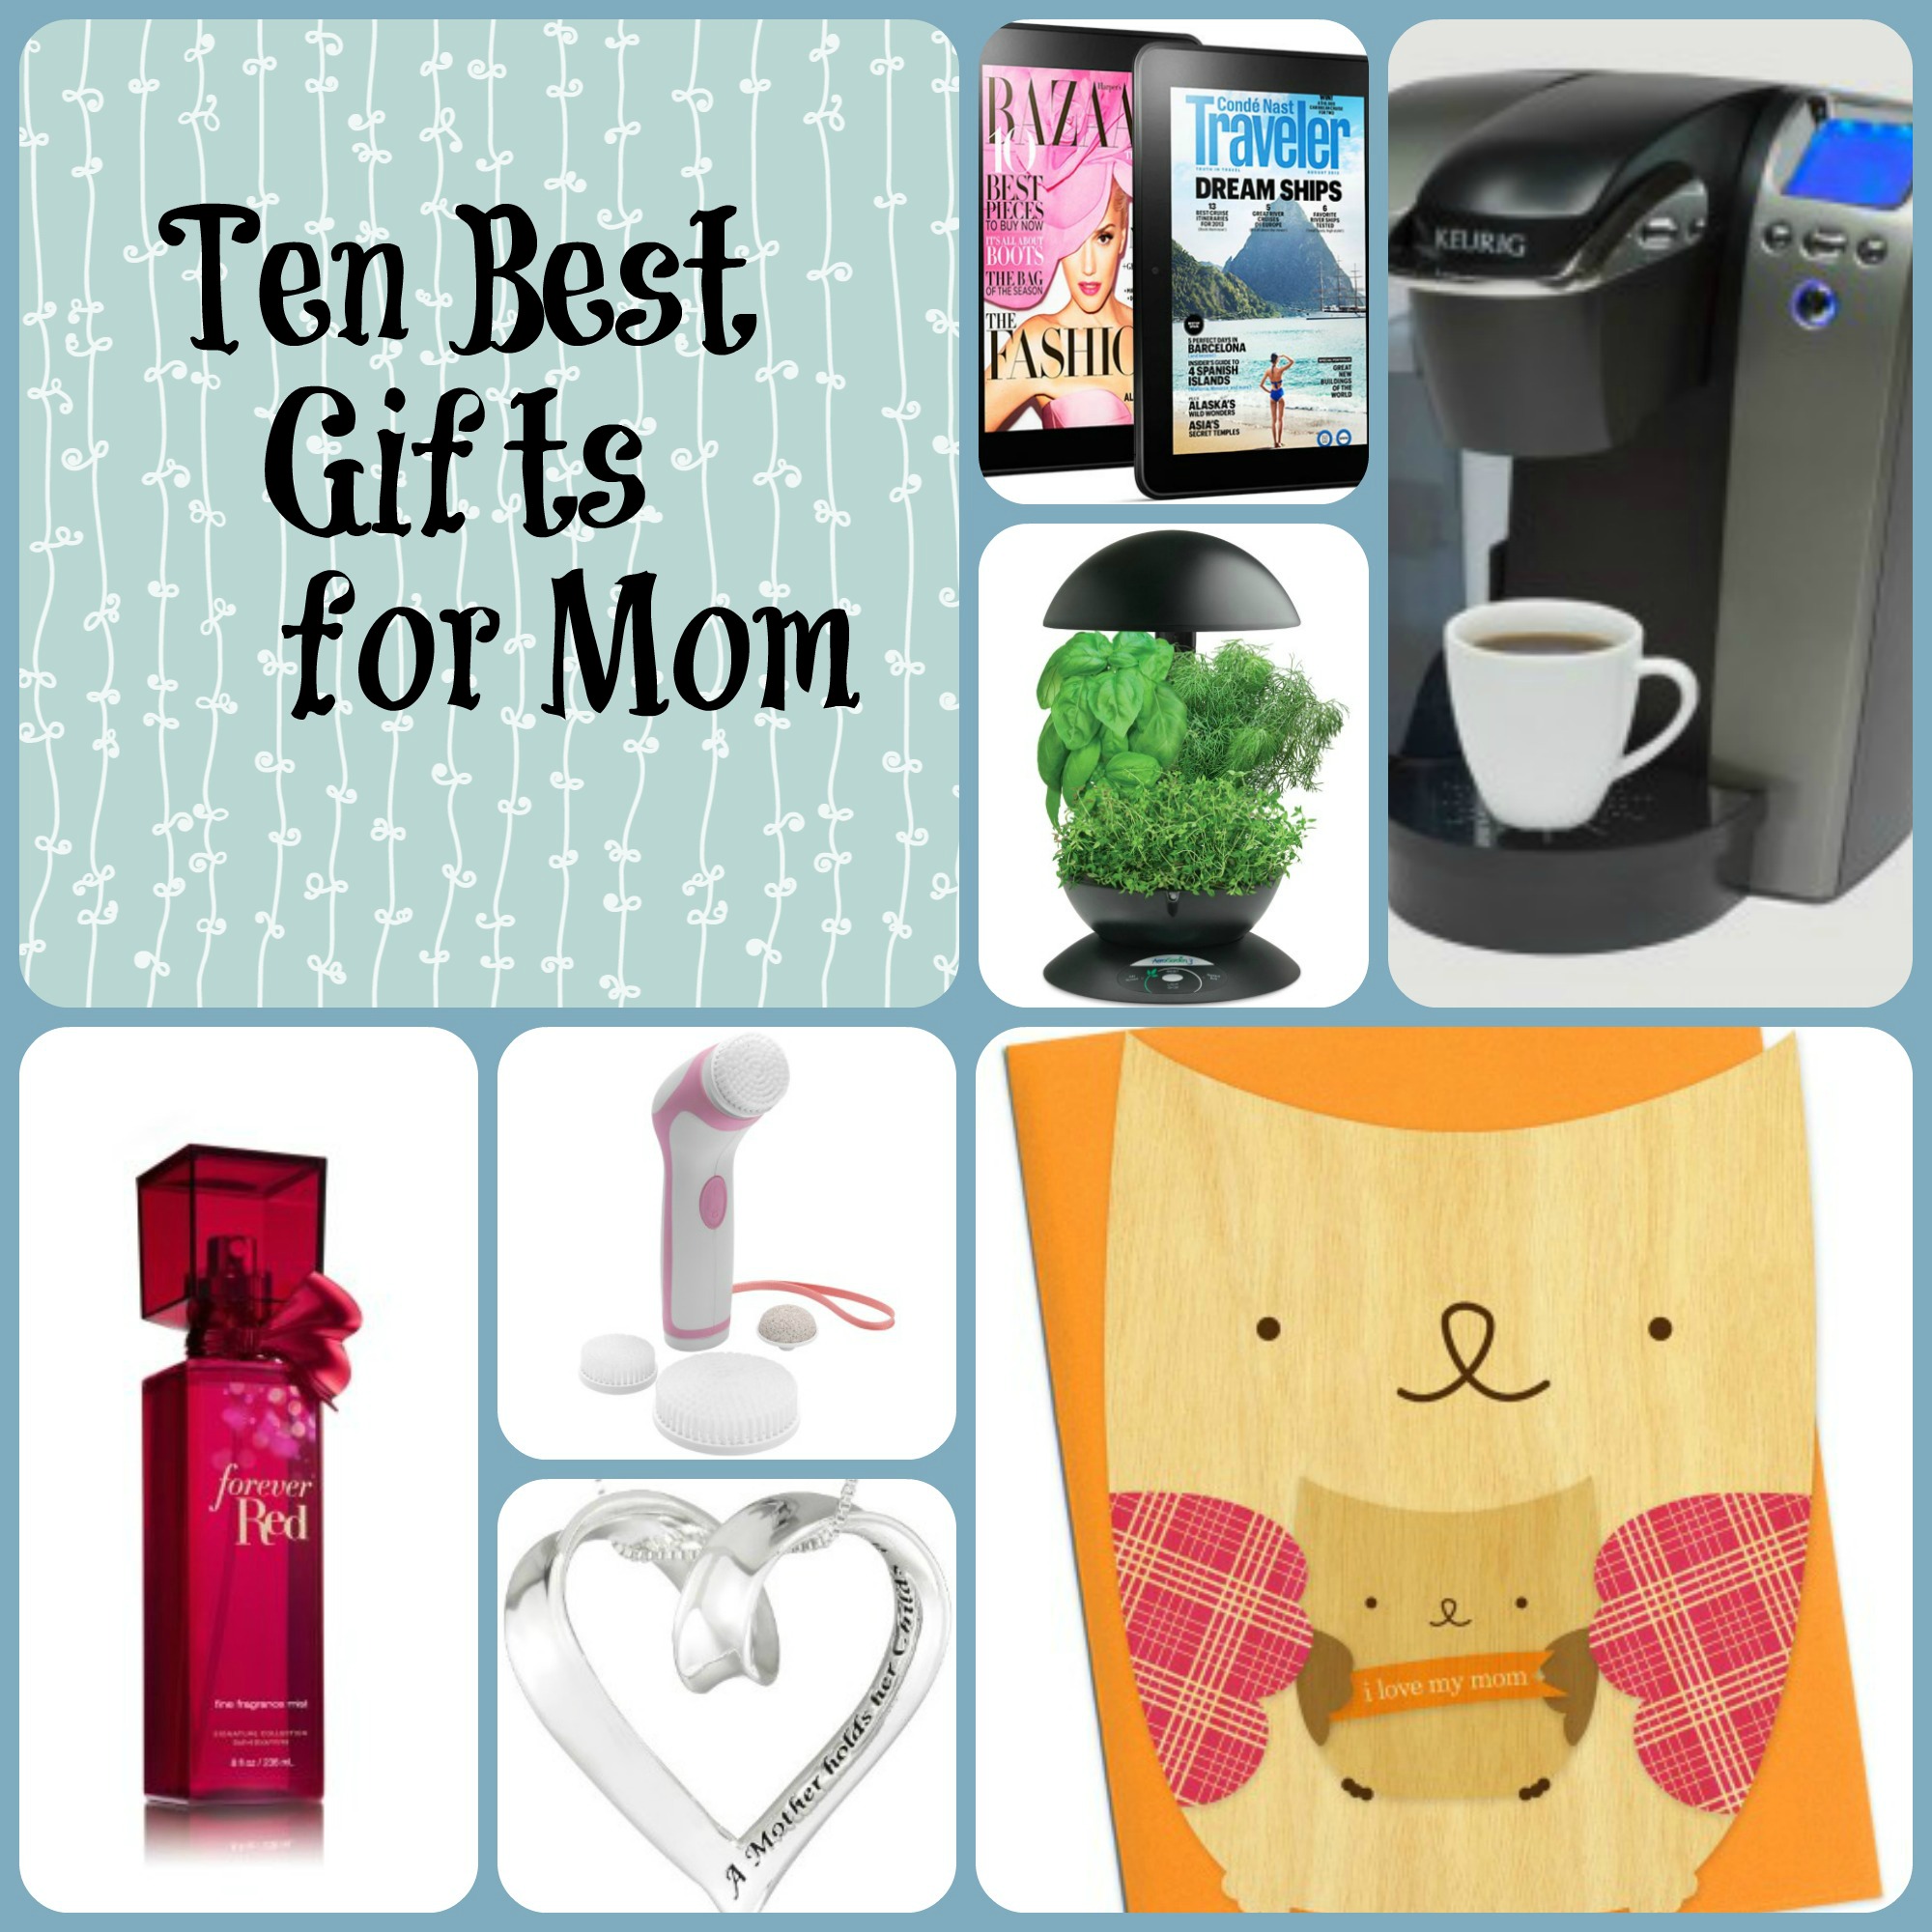 24 Best Best Birthday Gifts for Mom Home, Family, Style and Art Ideas